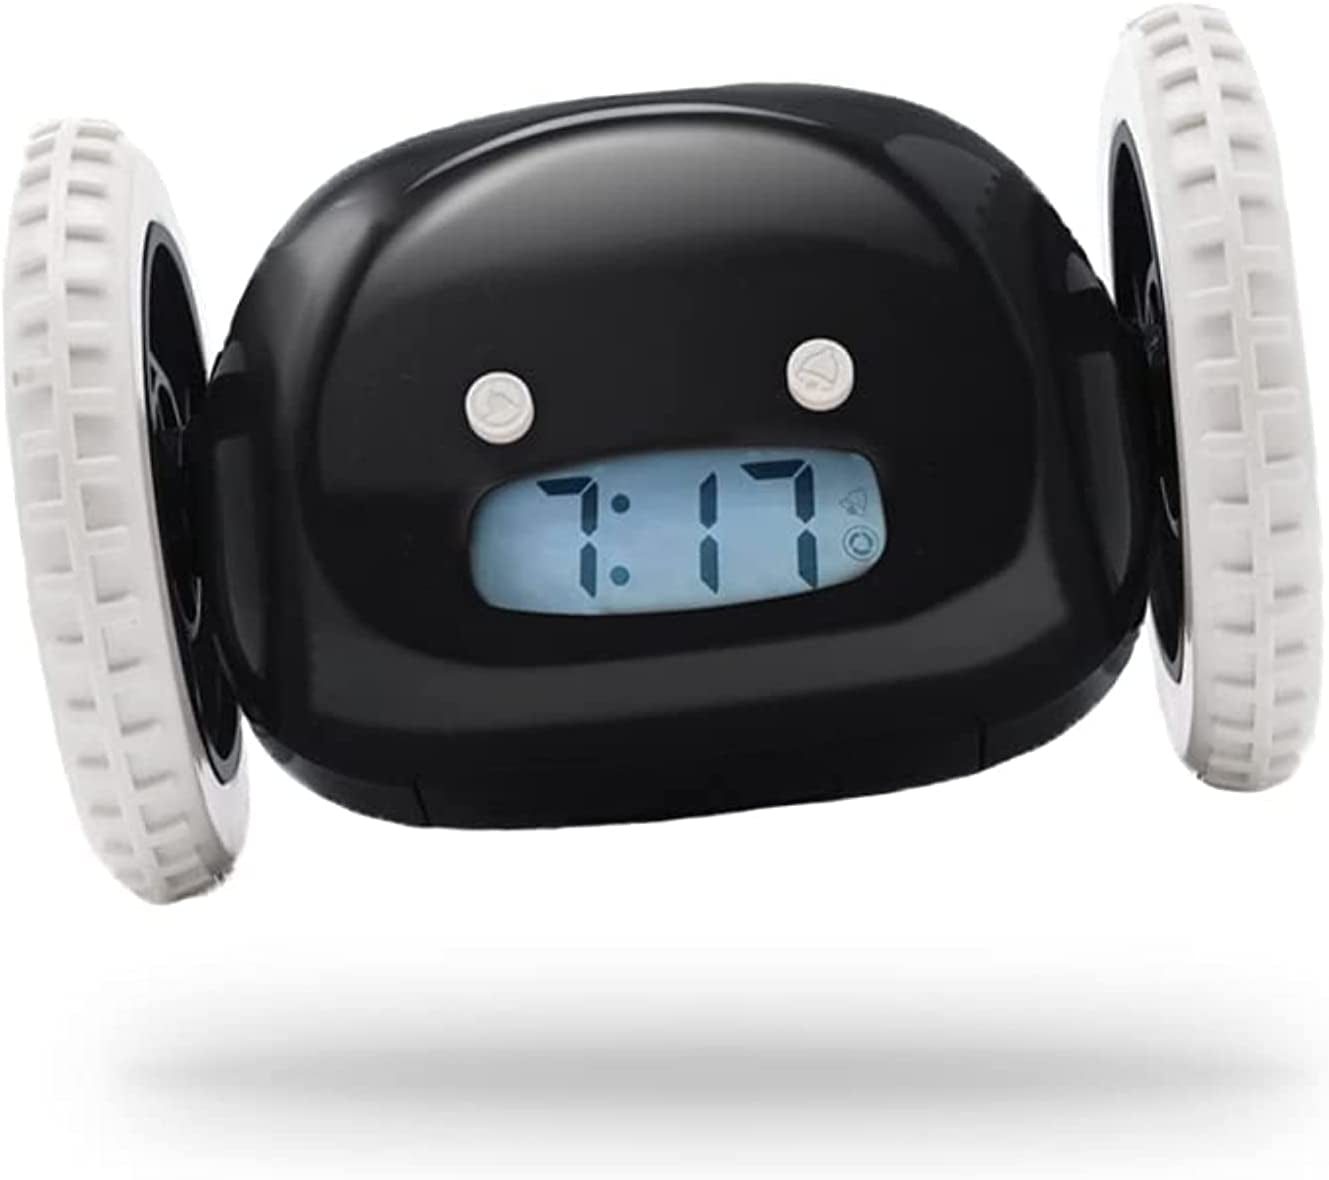 Clocky - The Runaway Alarm Clock That Will Get You Out of Bed